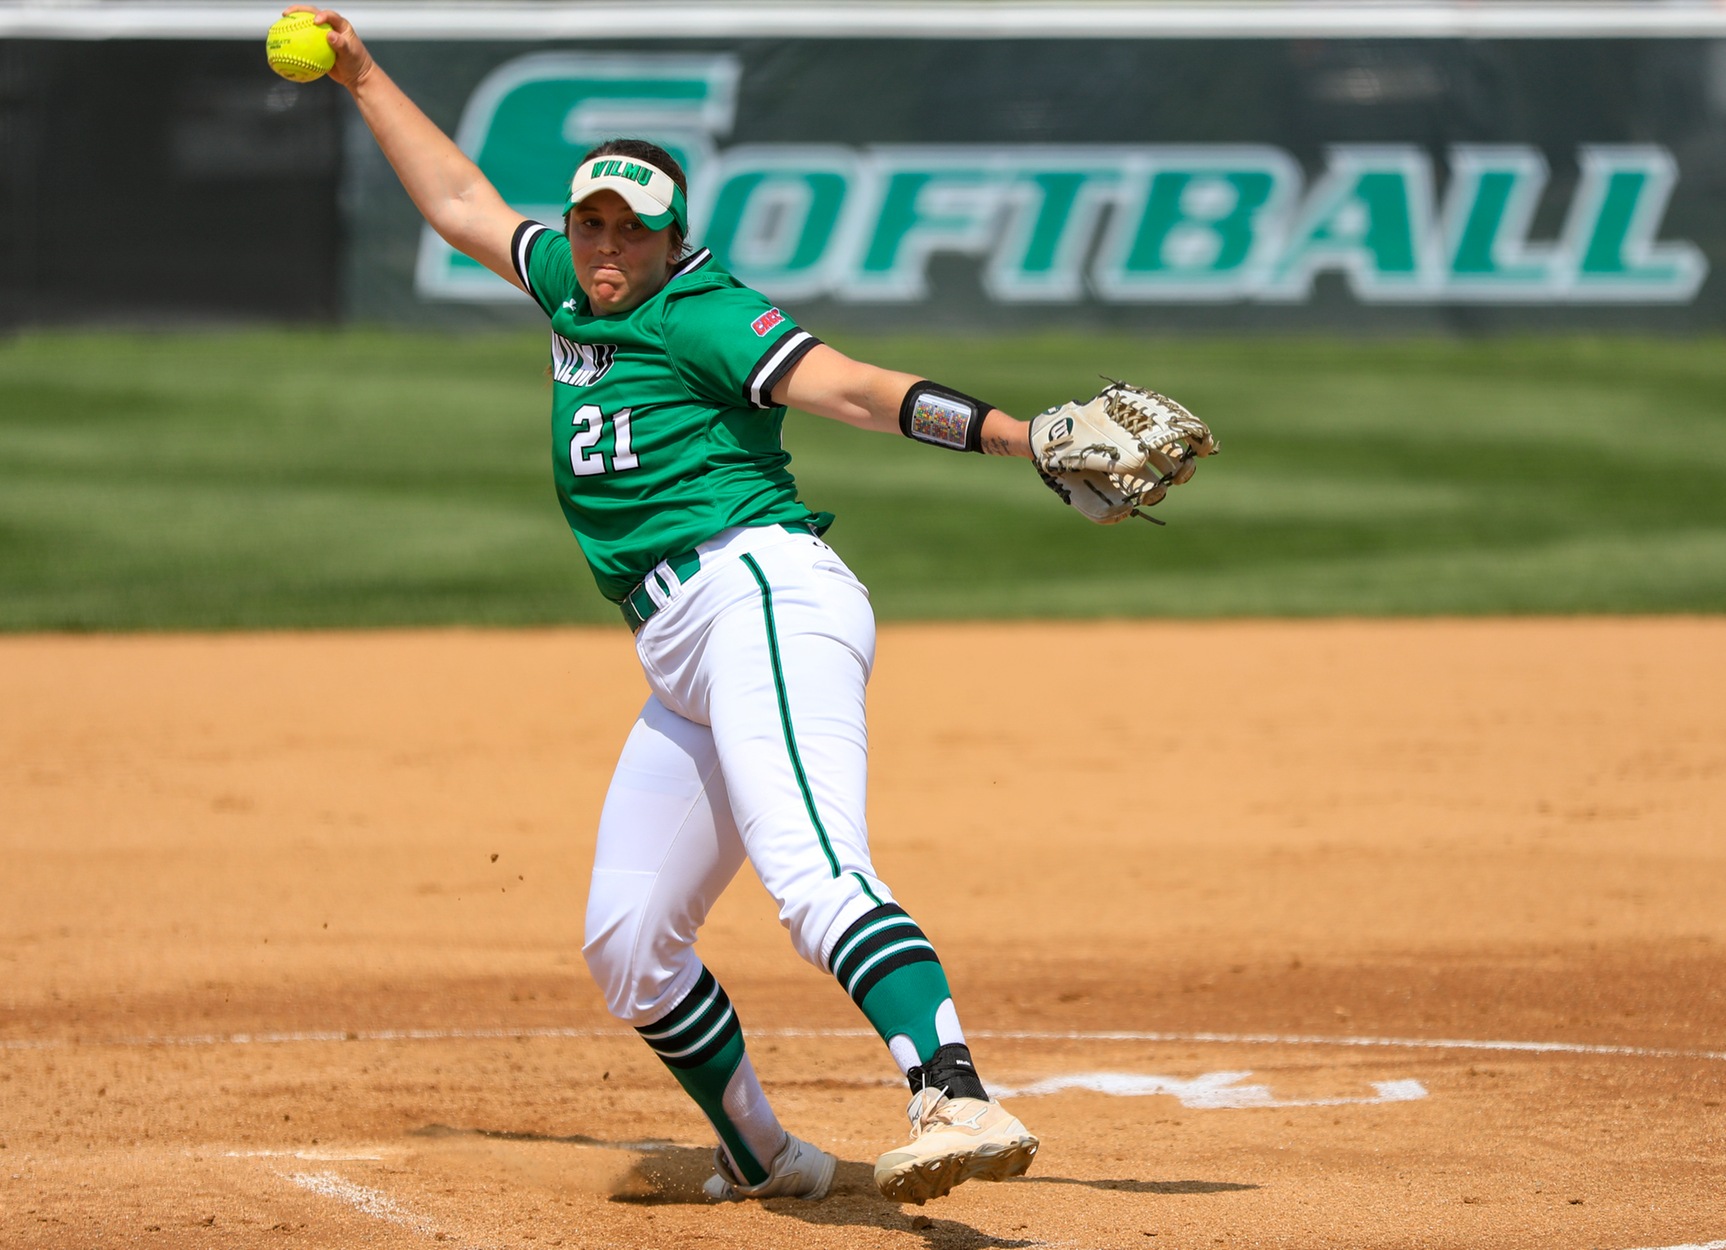 Copyright 2019; Wilmington University. All rights reserved. Photo of Caitlyn Whiteside who threw her second straight complete game shutout in game one. Photo by Chris Vitale. April 18, 2019 vs. Goldey-Beacom.